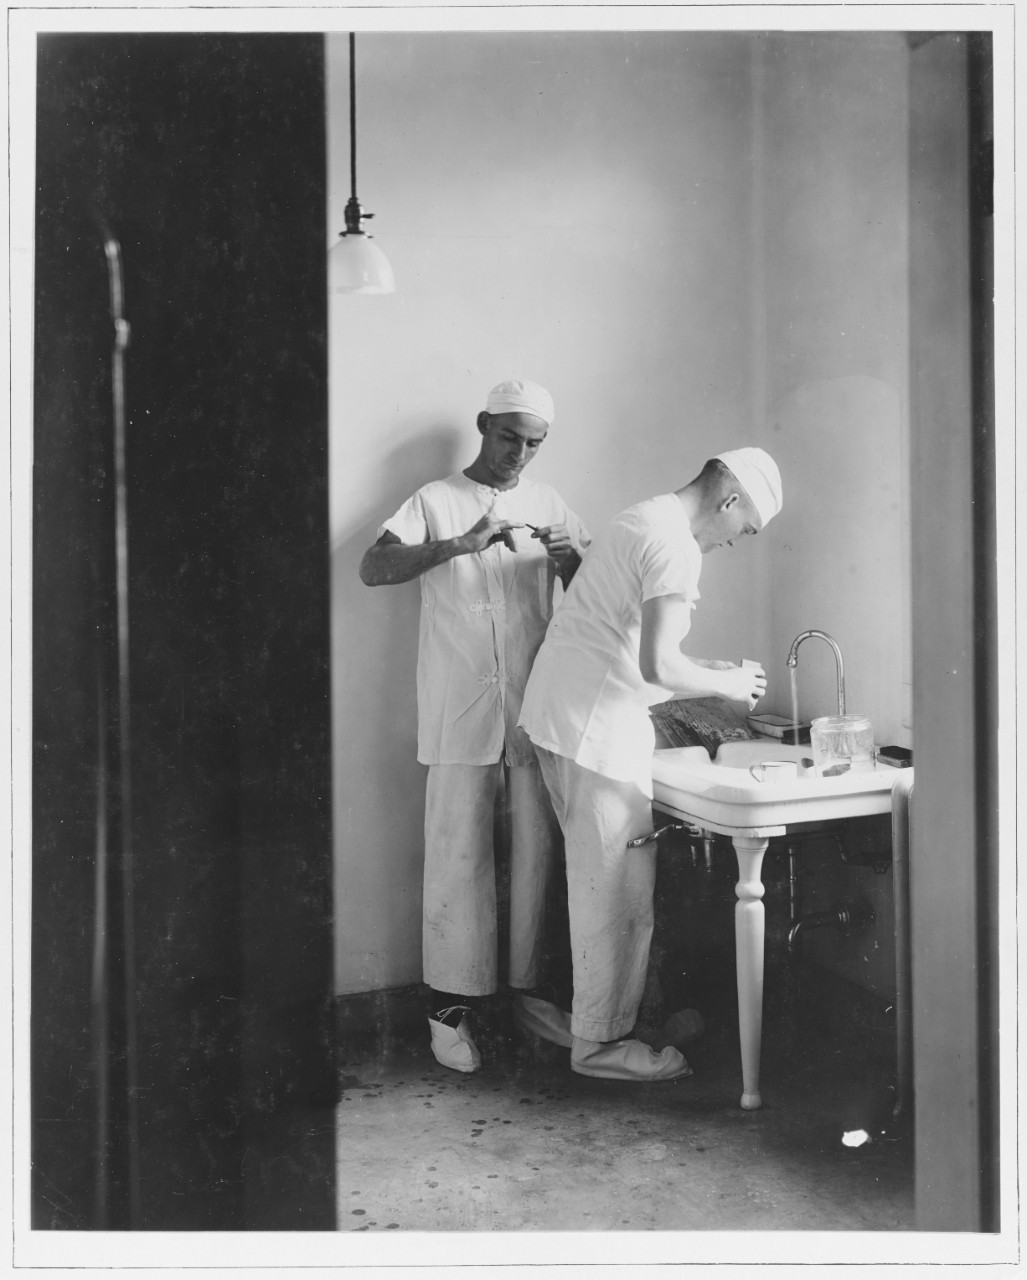 Disinfecting hands for surgical operation. U.S. Naval Hospital, New Orleans, Louisiana.